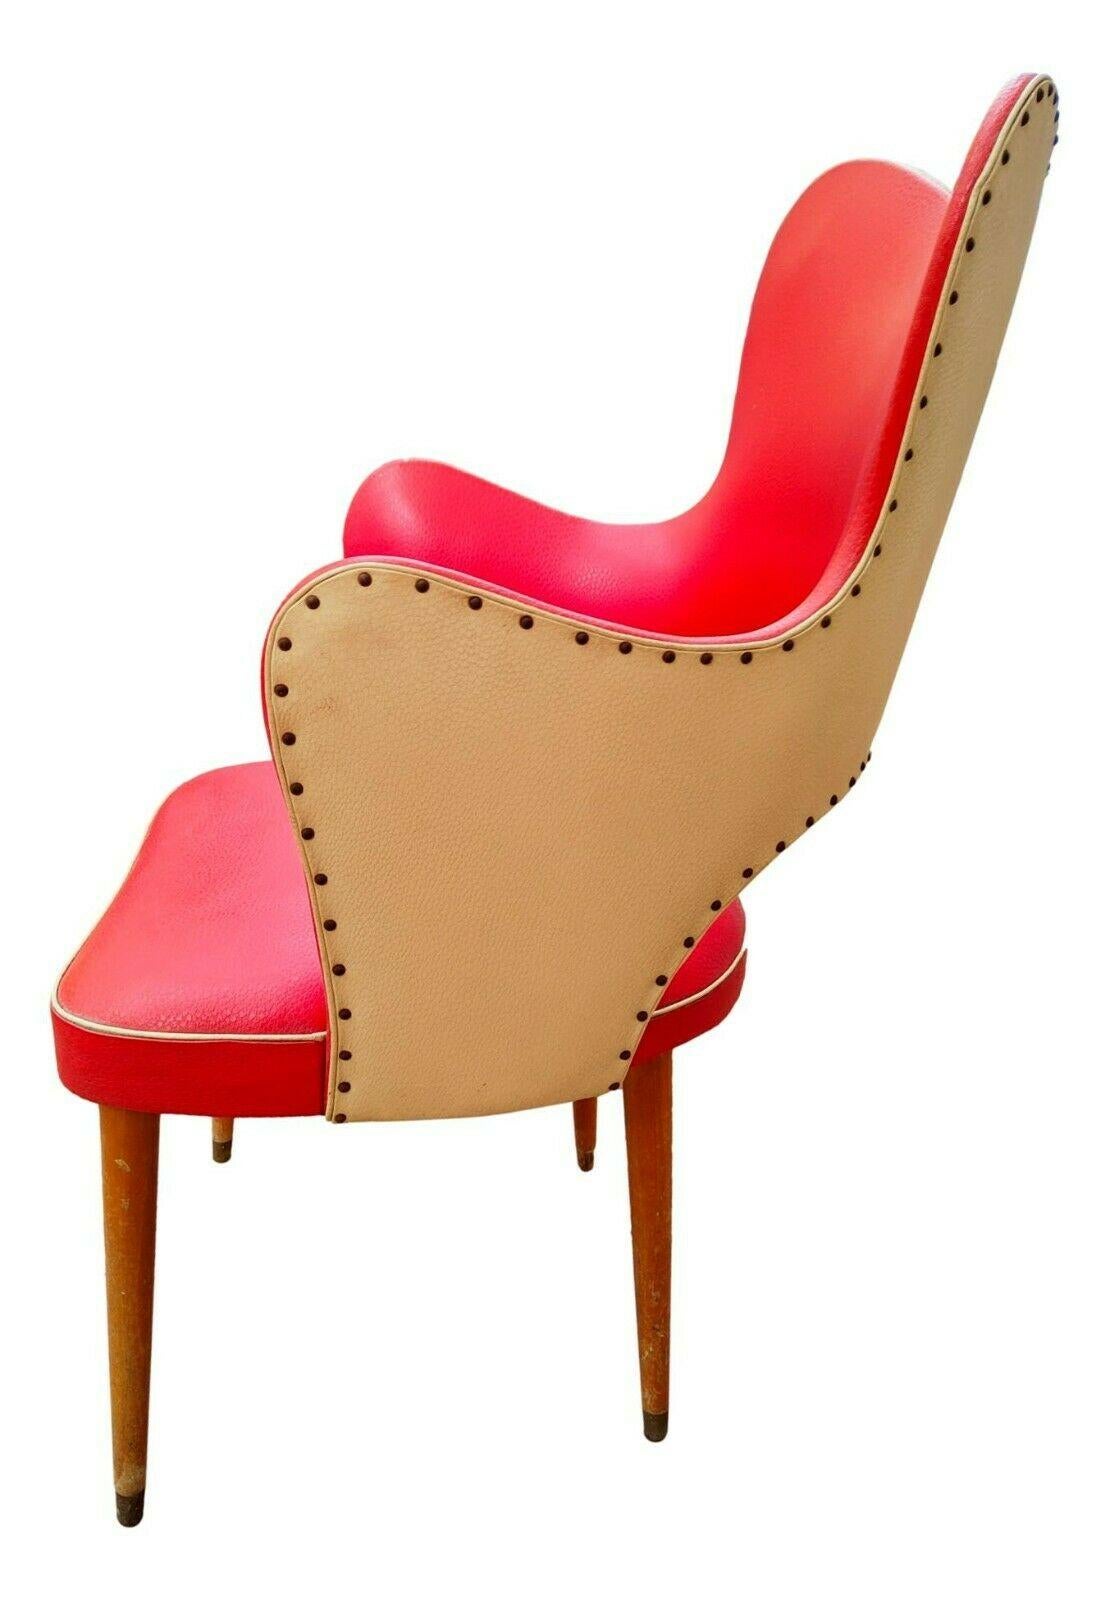 Italian Midcentury Two-Tone Armchair in Eco-Leather Attributed to Gastone Rinaldi, 1950s For Sale